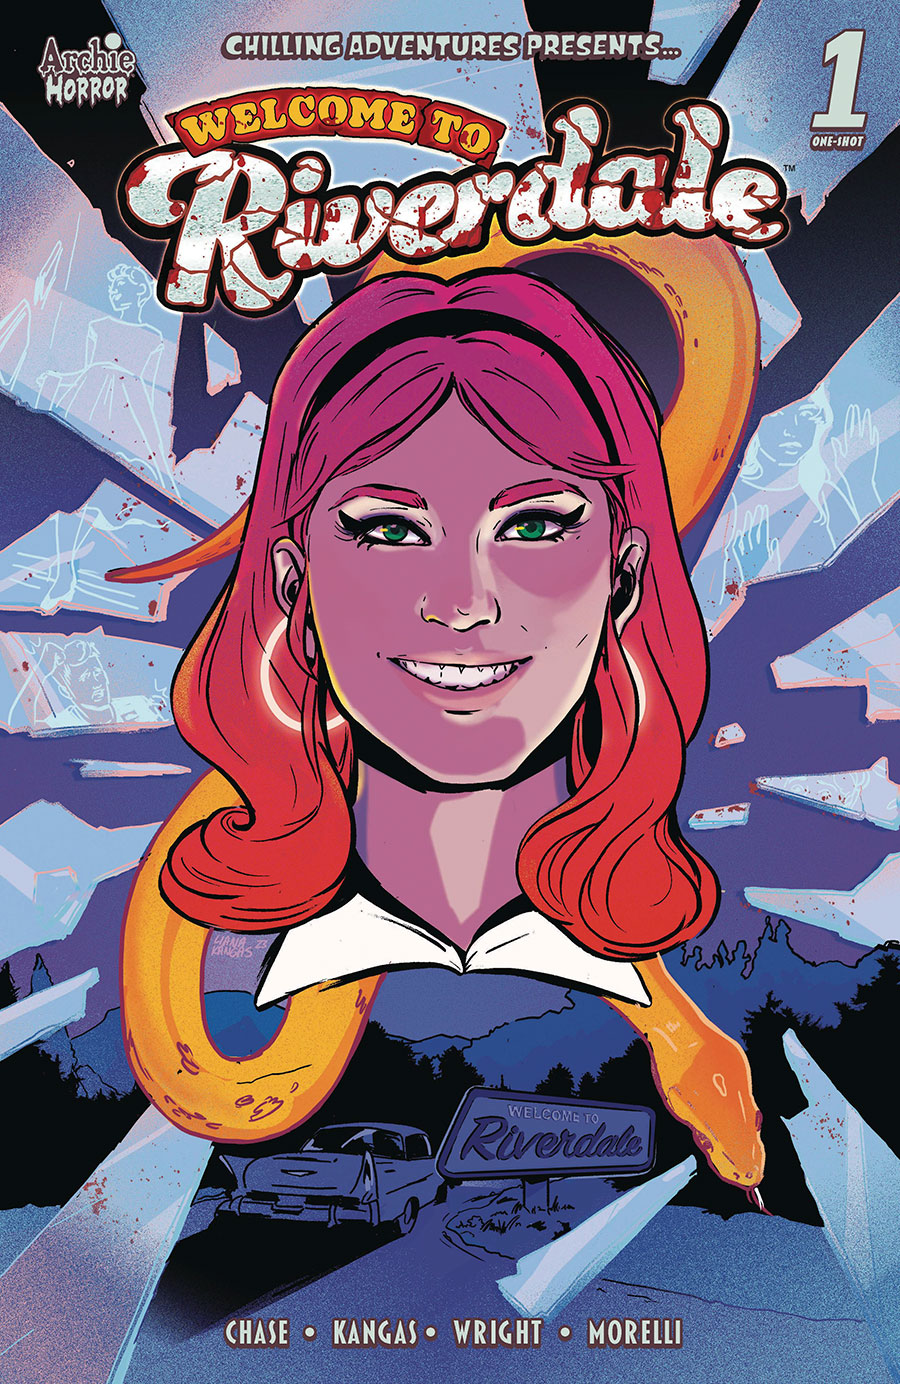 Chilling Adventures Presents Welcome To Riverdale #1 (One Shot) Cover A Regular Liana Kangas Cover